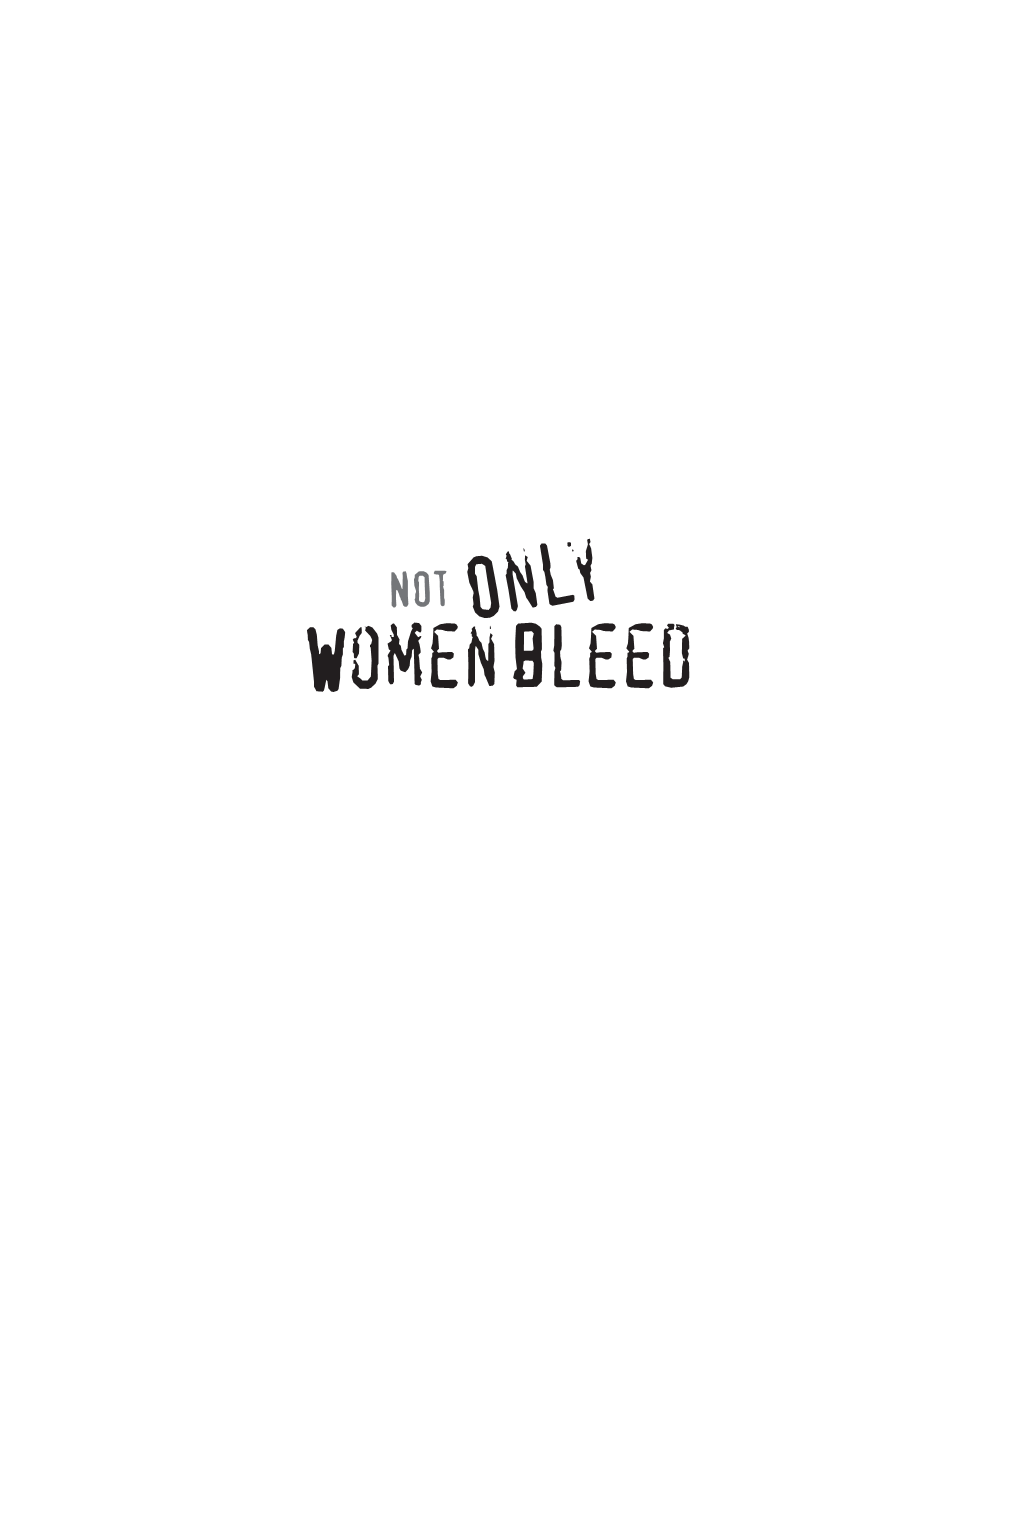 Not Only Women Bleed Copyright © 2012 by Dick Wagner